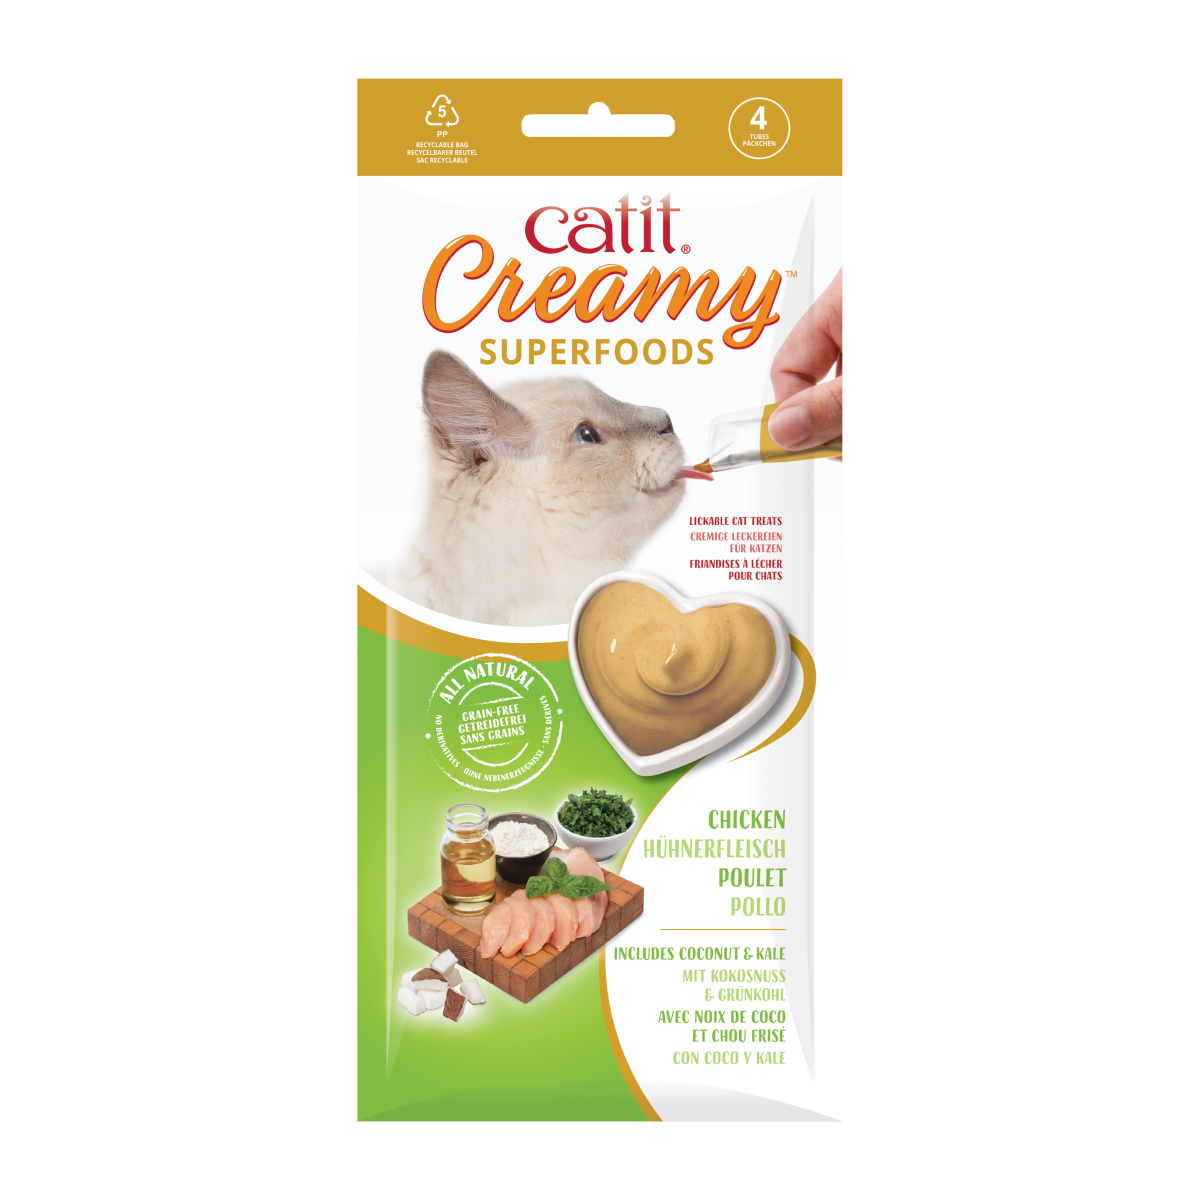 Catit Creamy Superfood Treats, Chicken Recipe with Coconut & Kale